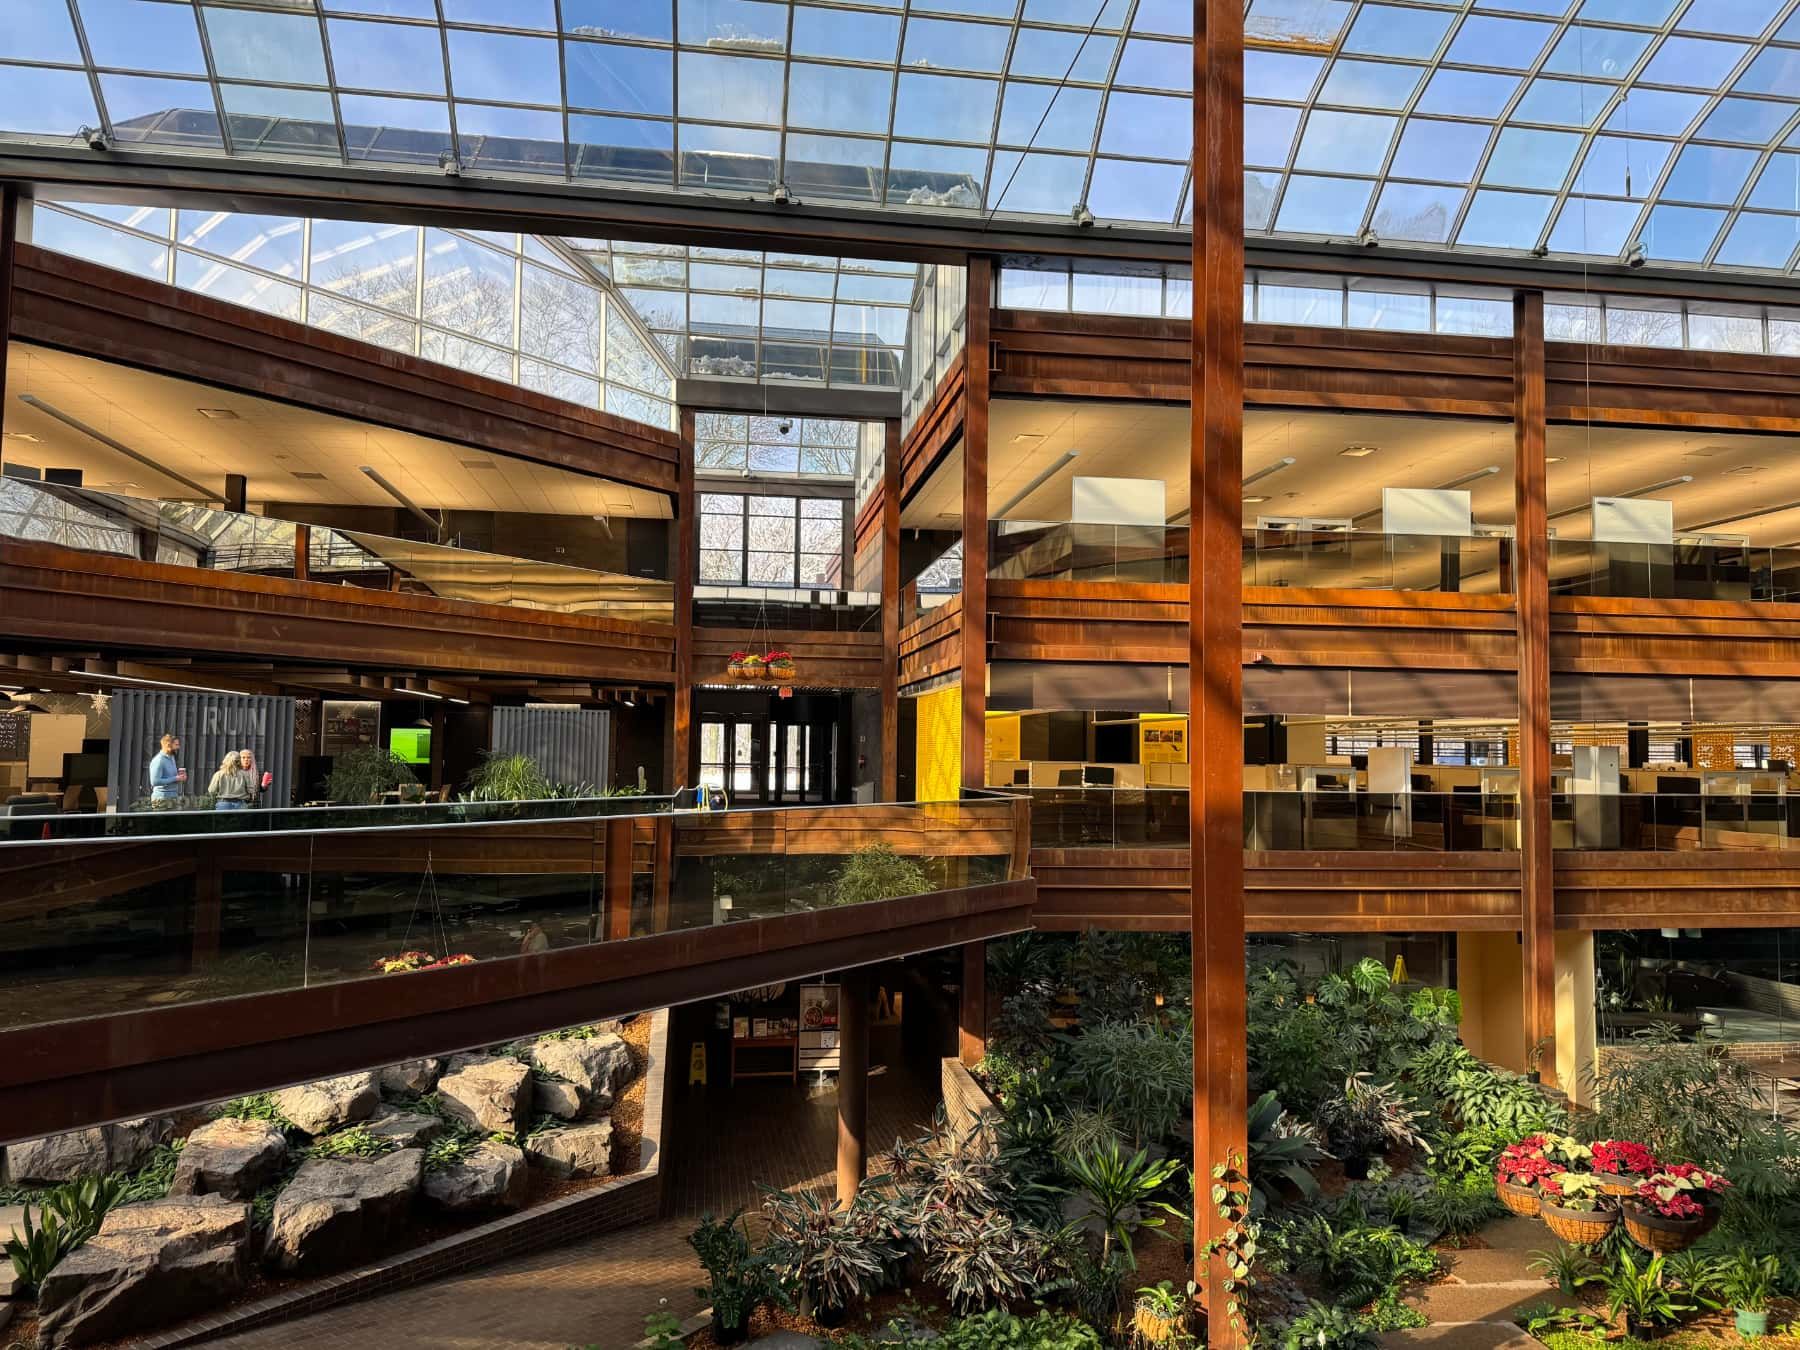 Large indoor space with a garden at the ground level with rust-colored steel balconies on multiple levels. A large glass ceiling allows light to fill the space. The garden has lush green plants and rocks enhancing the natural look. The architecture is modern with clean lines and open spaces allowing for visibility across levels.